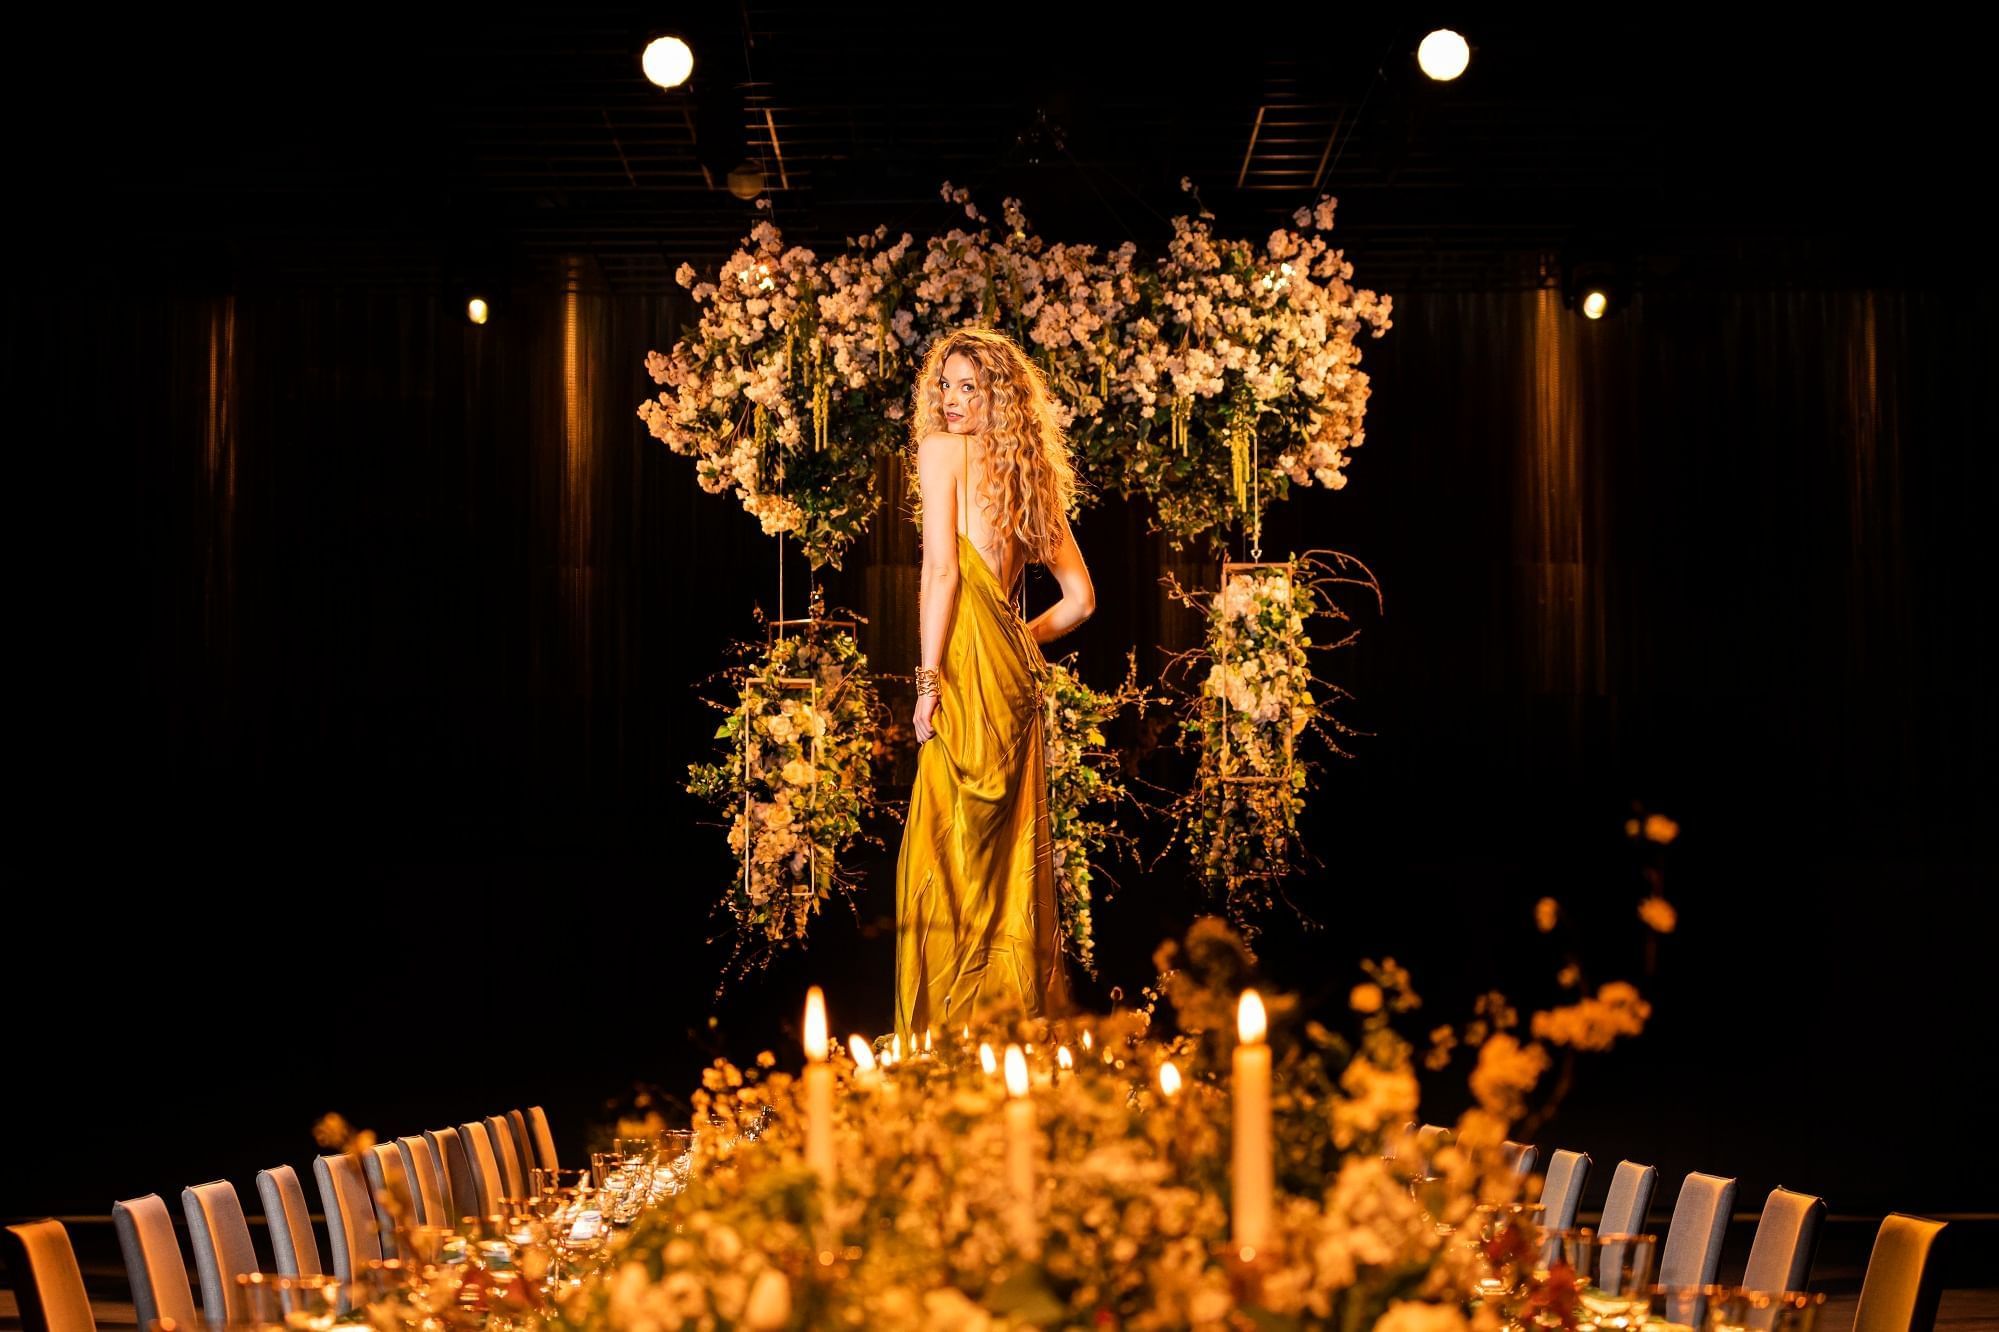 A yellow-dressed lady in a model poses on the decor table at The Londoner Hotel